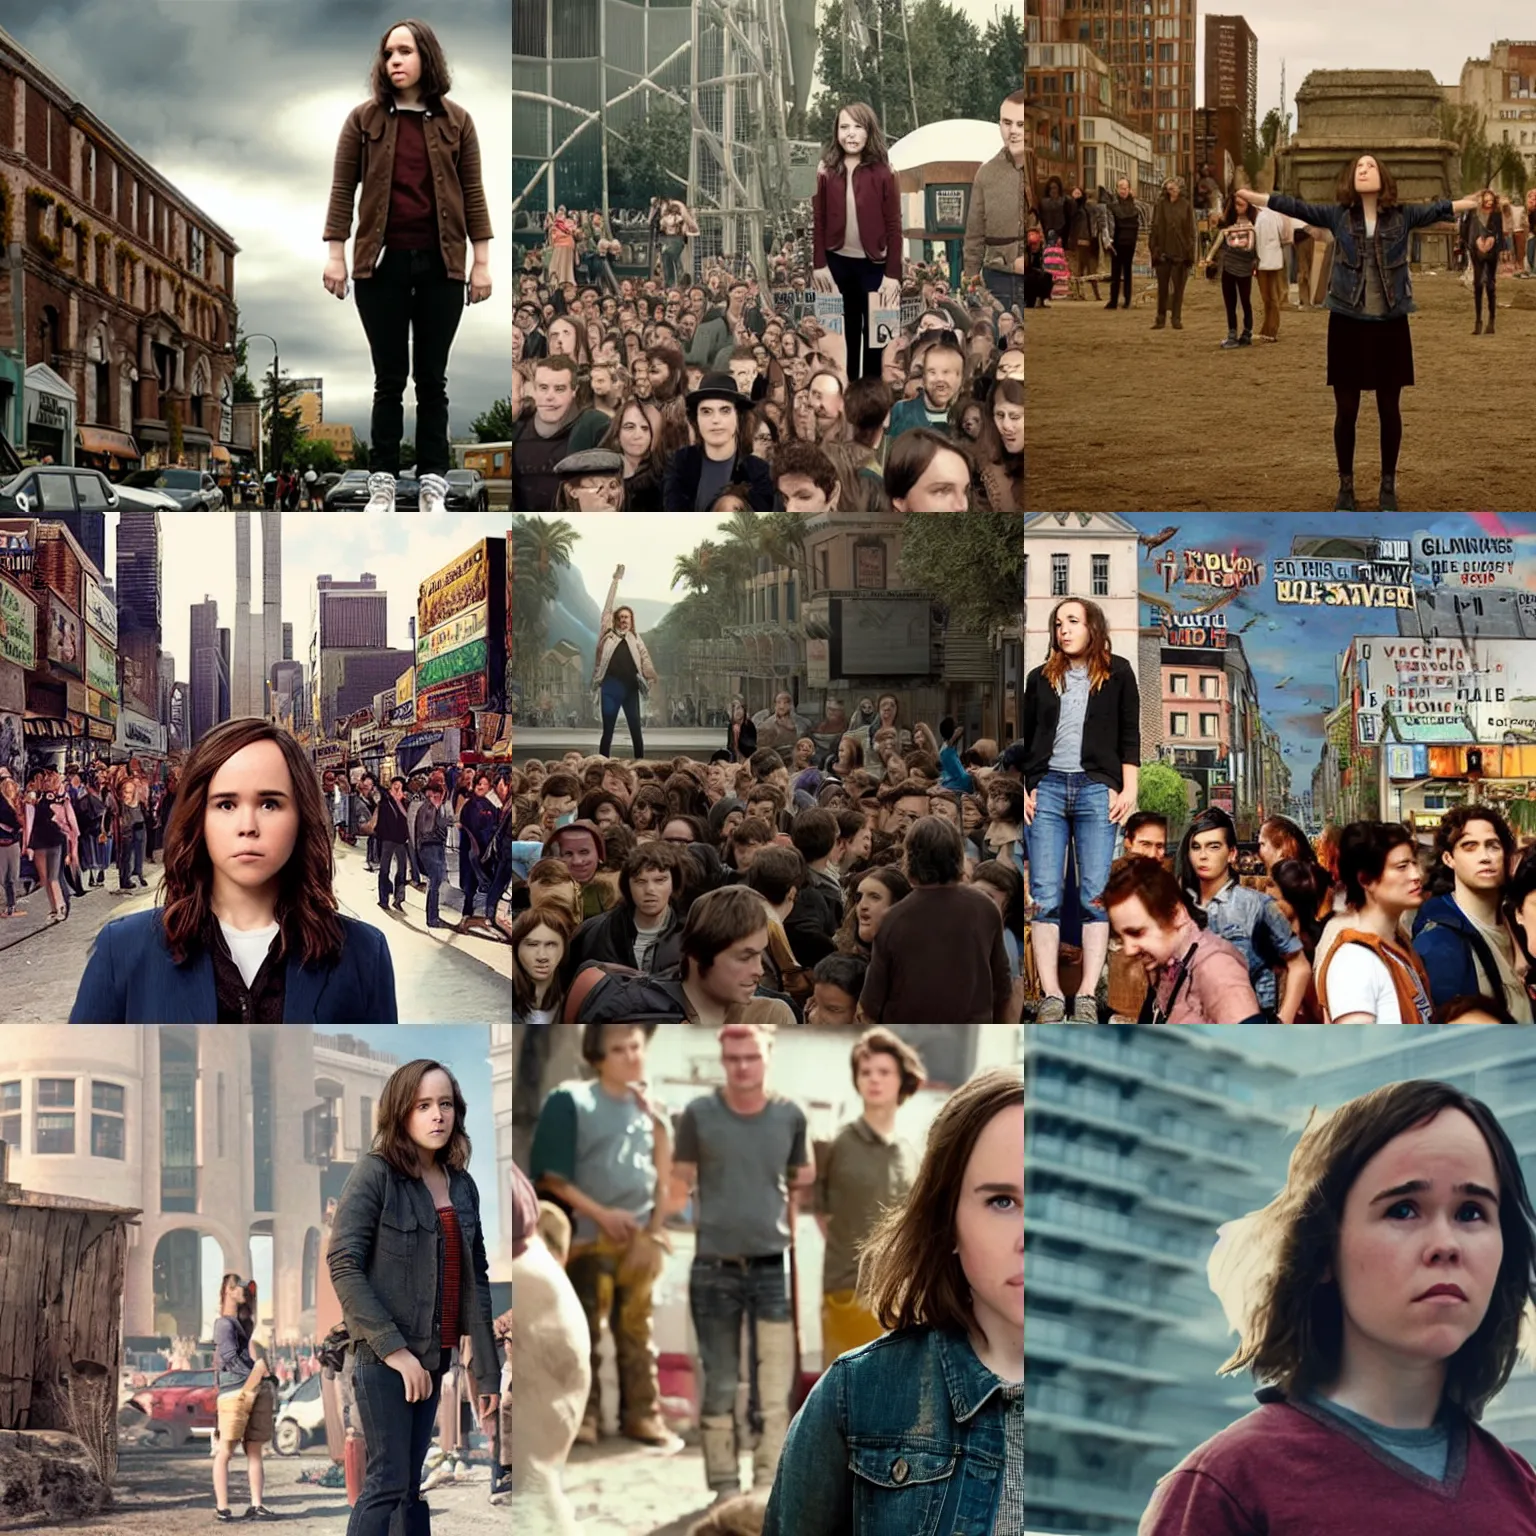 Prompt: Giant Ellen Page stands next to a town, surrounded by people, Gulliver's Travels